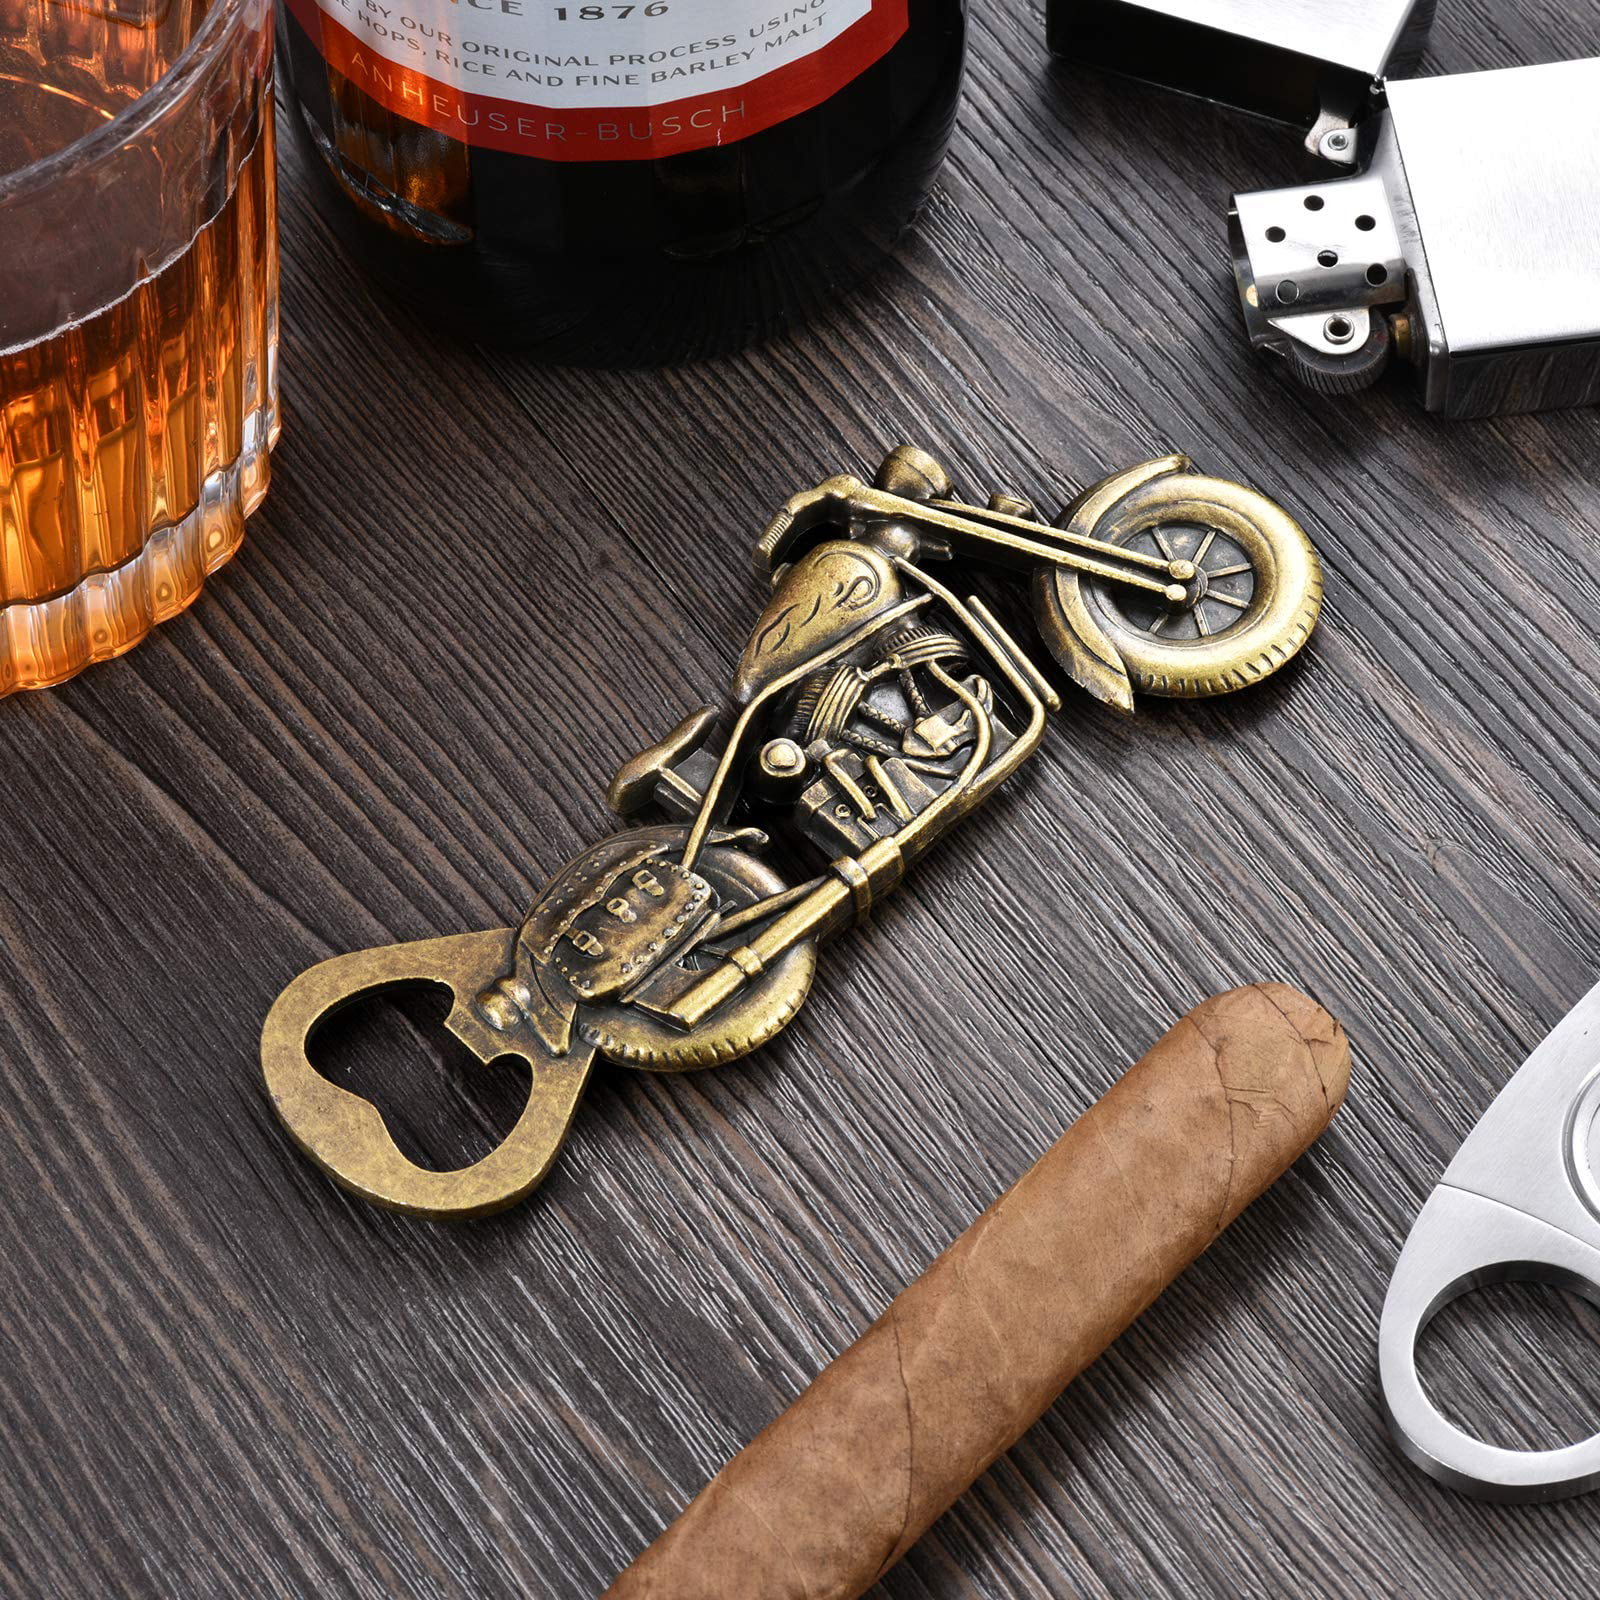 Motorcycle Beer Gifts for Men Dad Husband Vintage Motorcycle Bottle Opener Christmas Presents Stocking Stuffers Unique Birthday Beer Gifts for Him Boyfriend Father Grandpa-1 PACK 